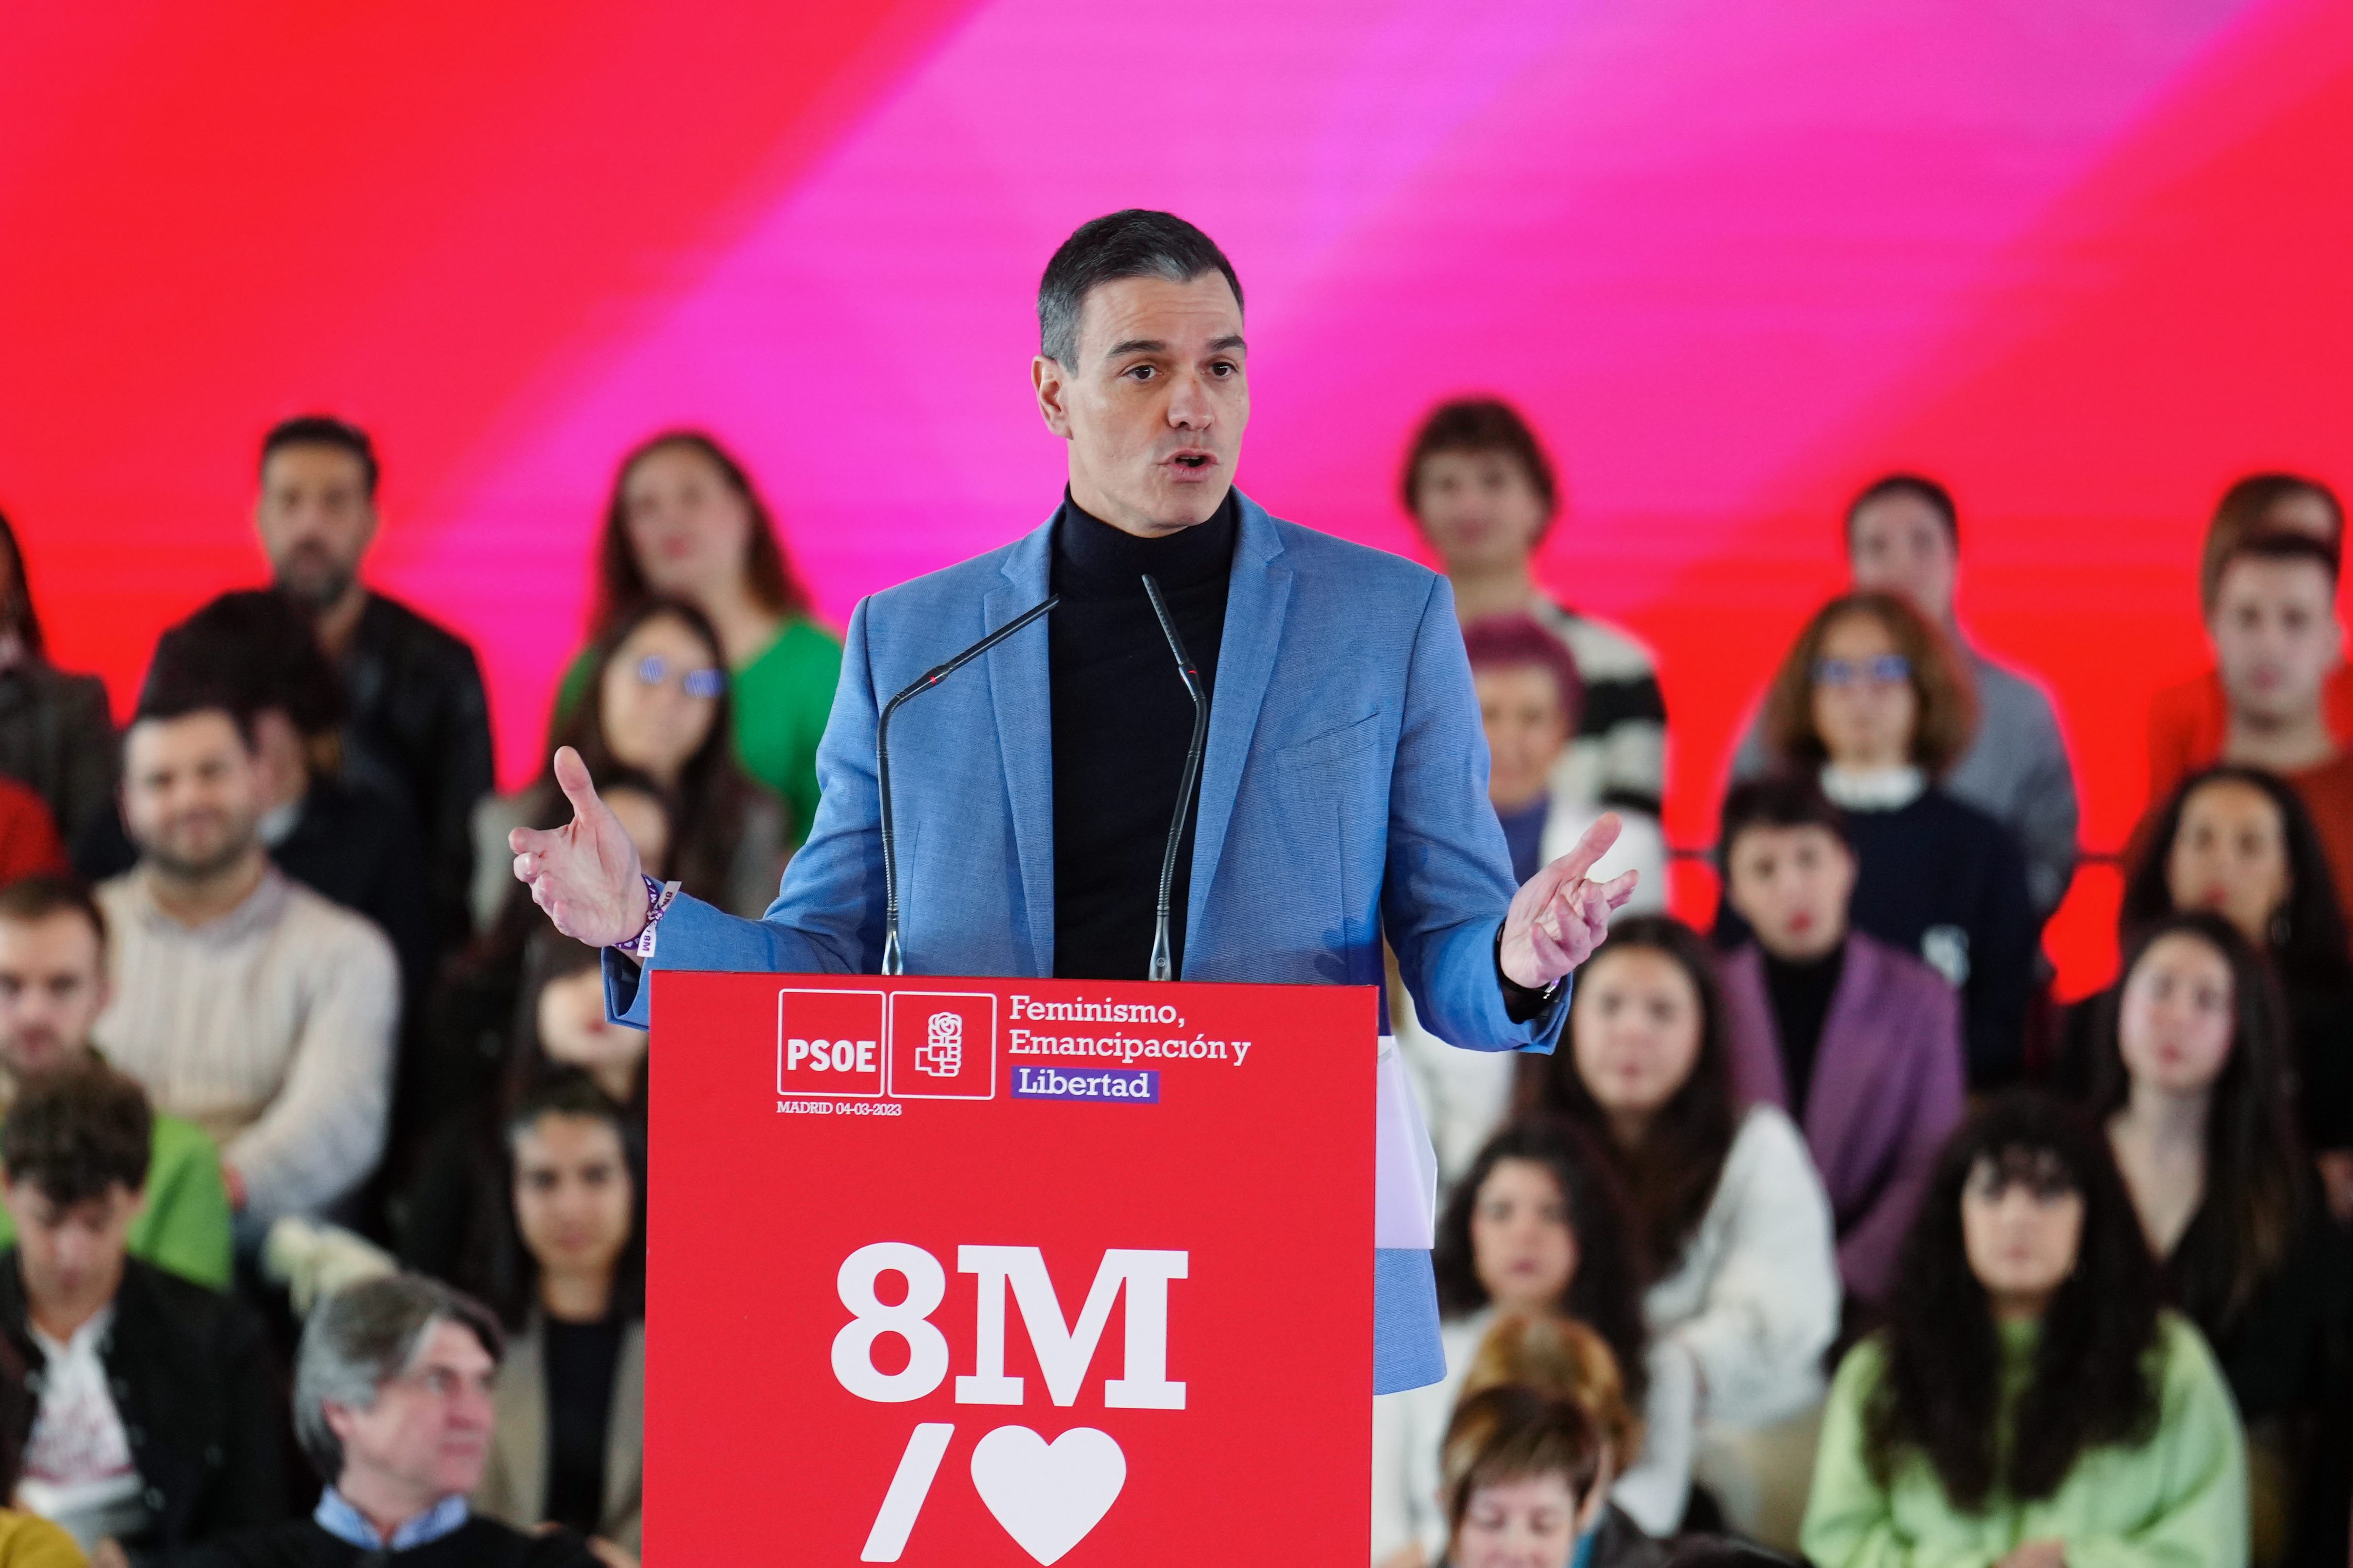 Pedro Sánchez during his participation in an act this Saturday on feminism on the occasion of International Women's Day.